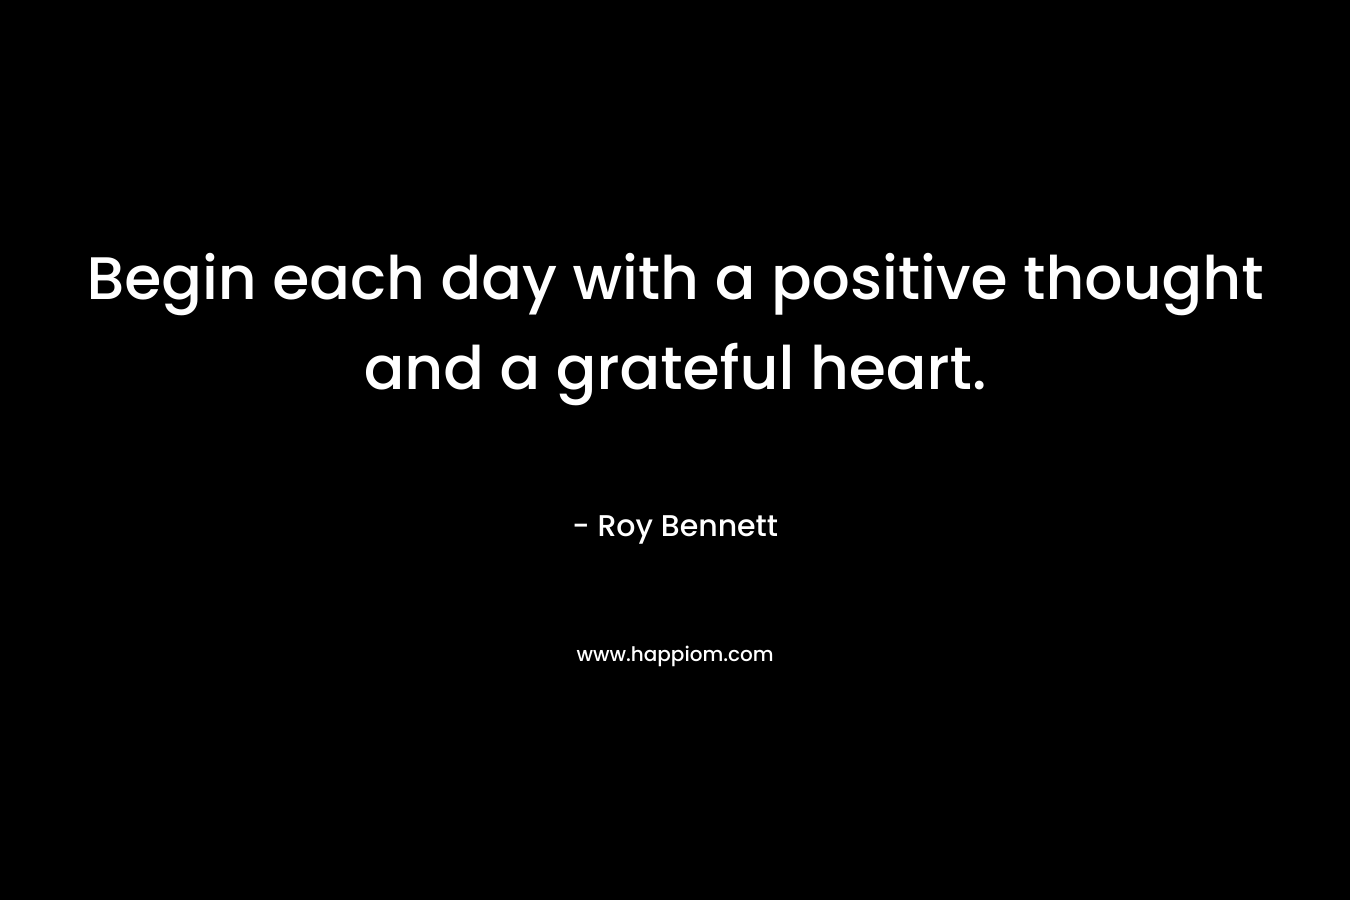 Begin each day with a positive thought and a grateful heart.